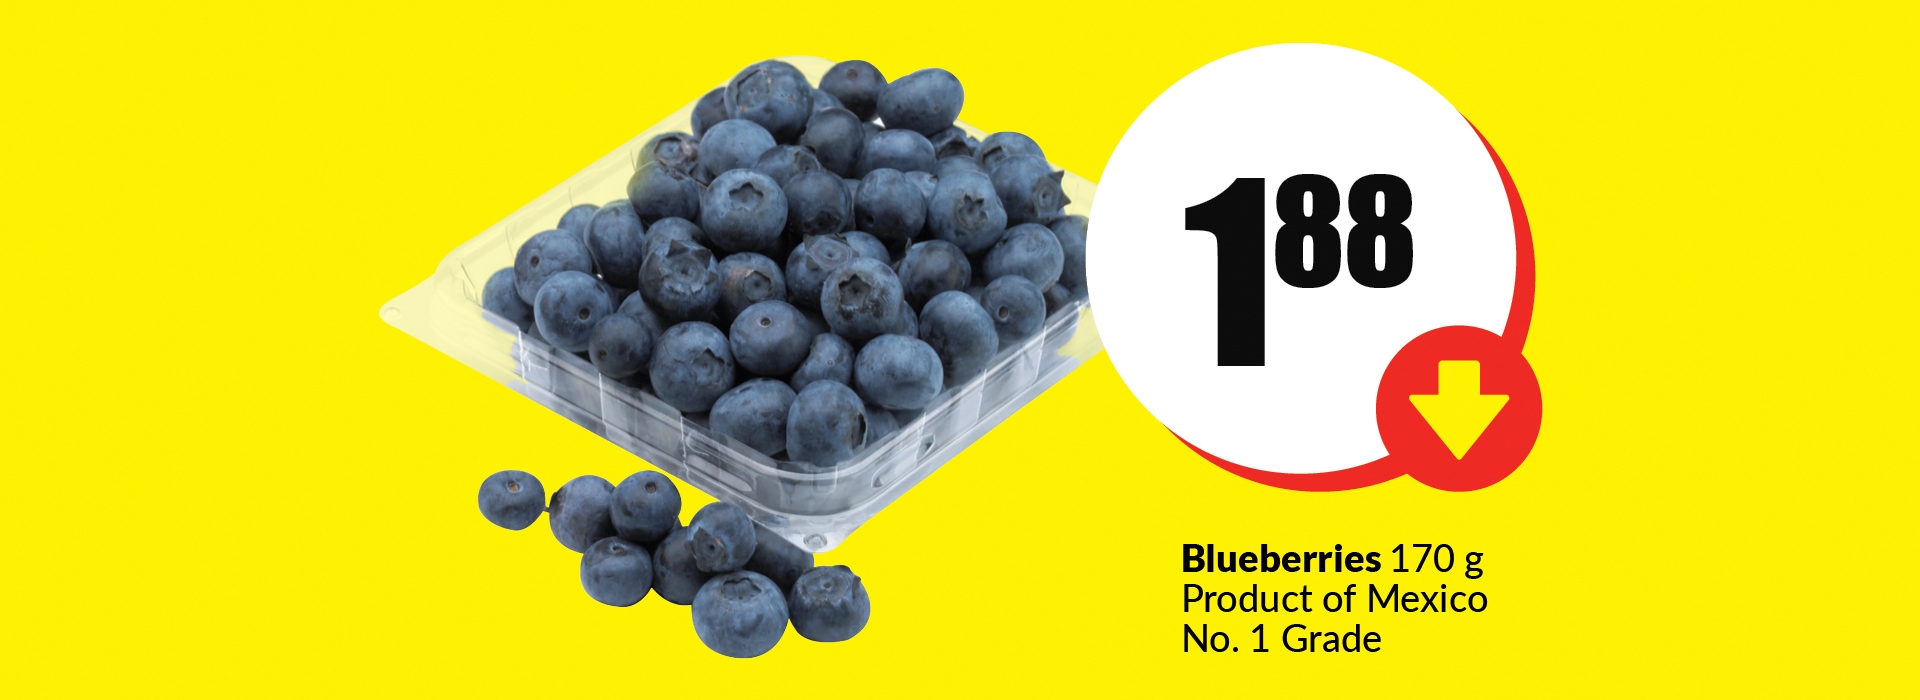 The following image contains the text " Blueberries 170 g product Mexico No. 1 Gread. Get them at just $1.88."